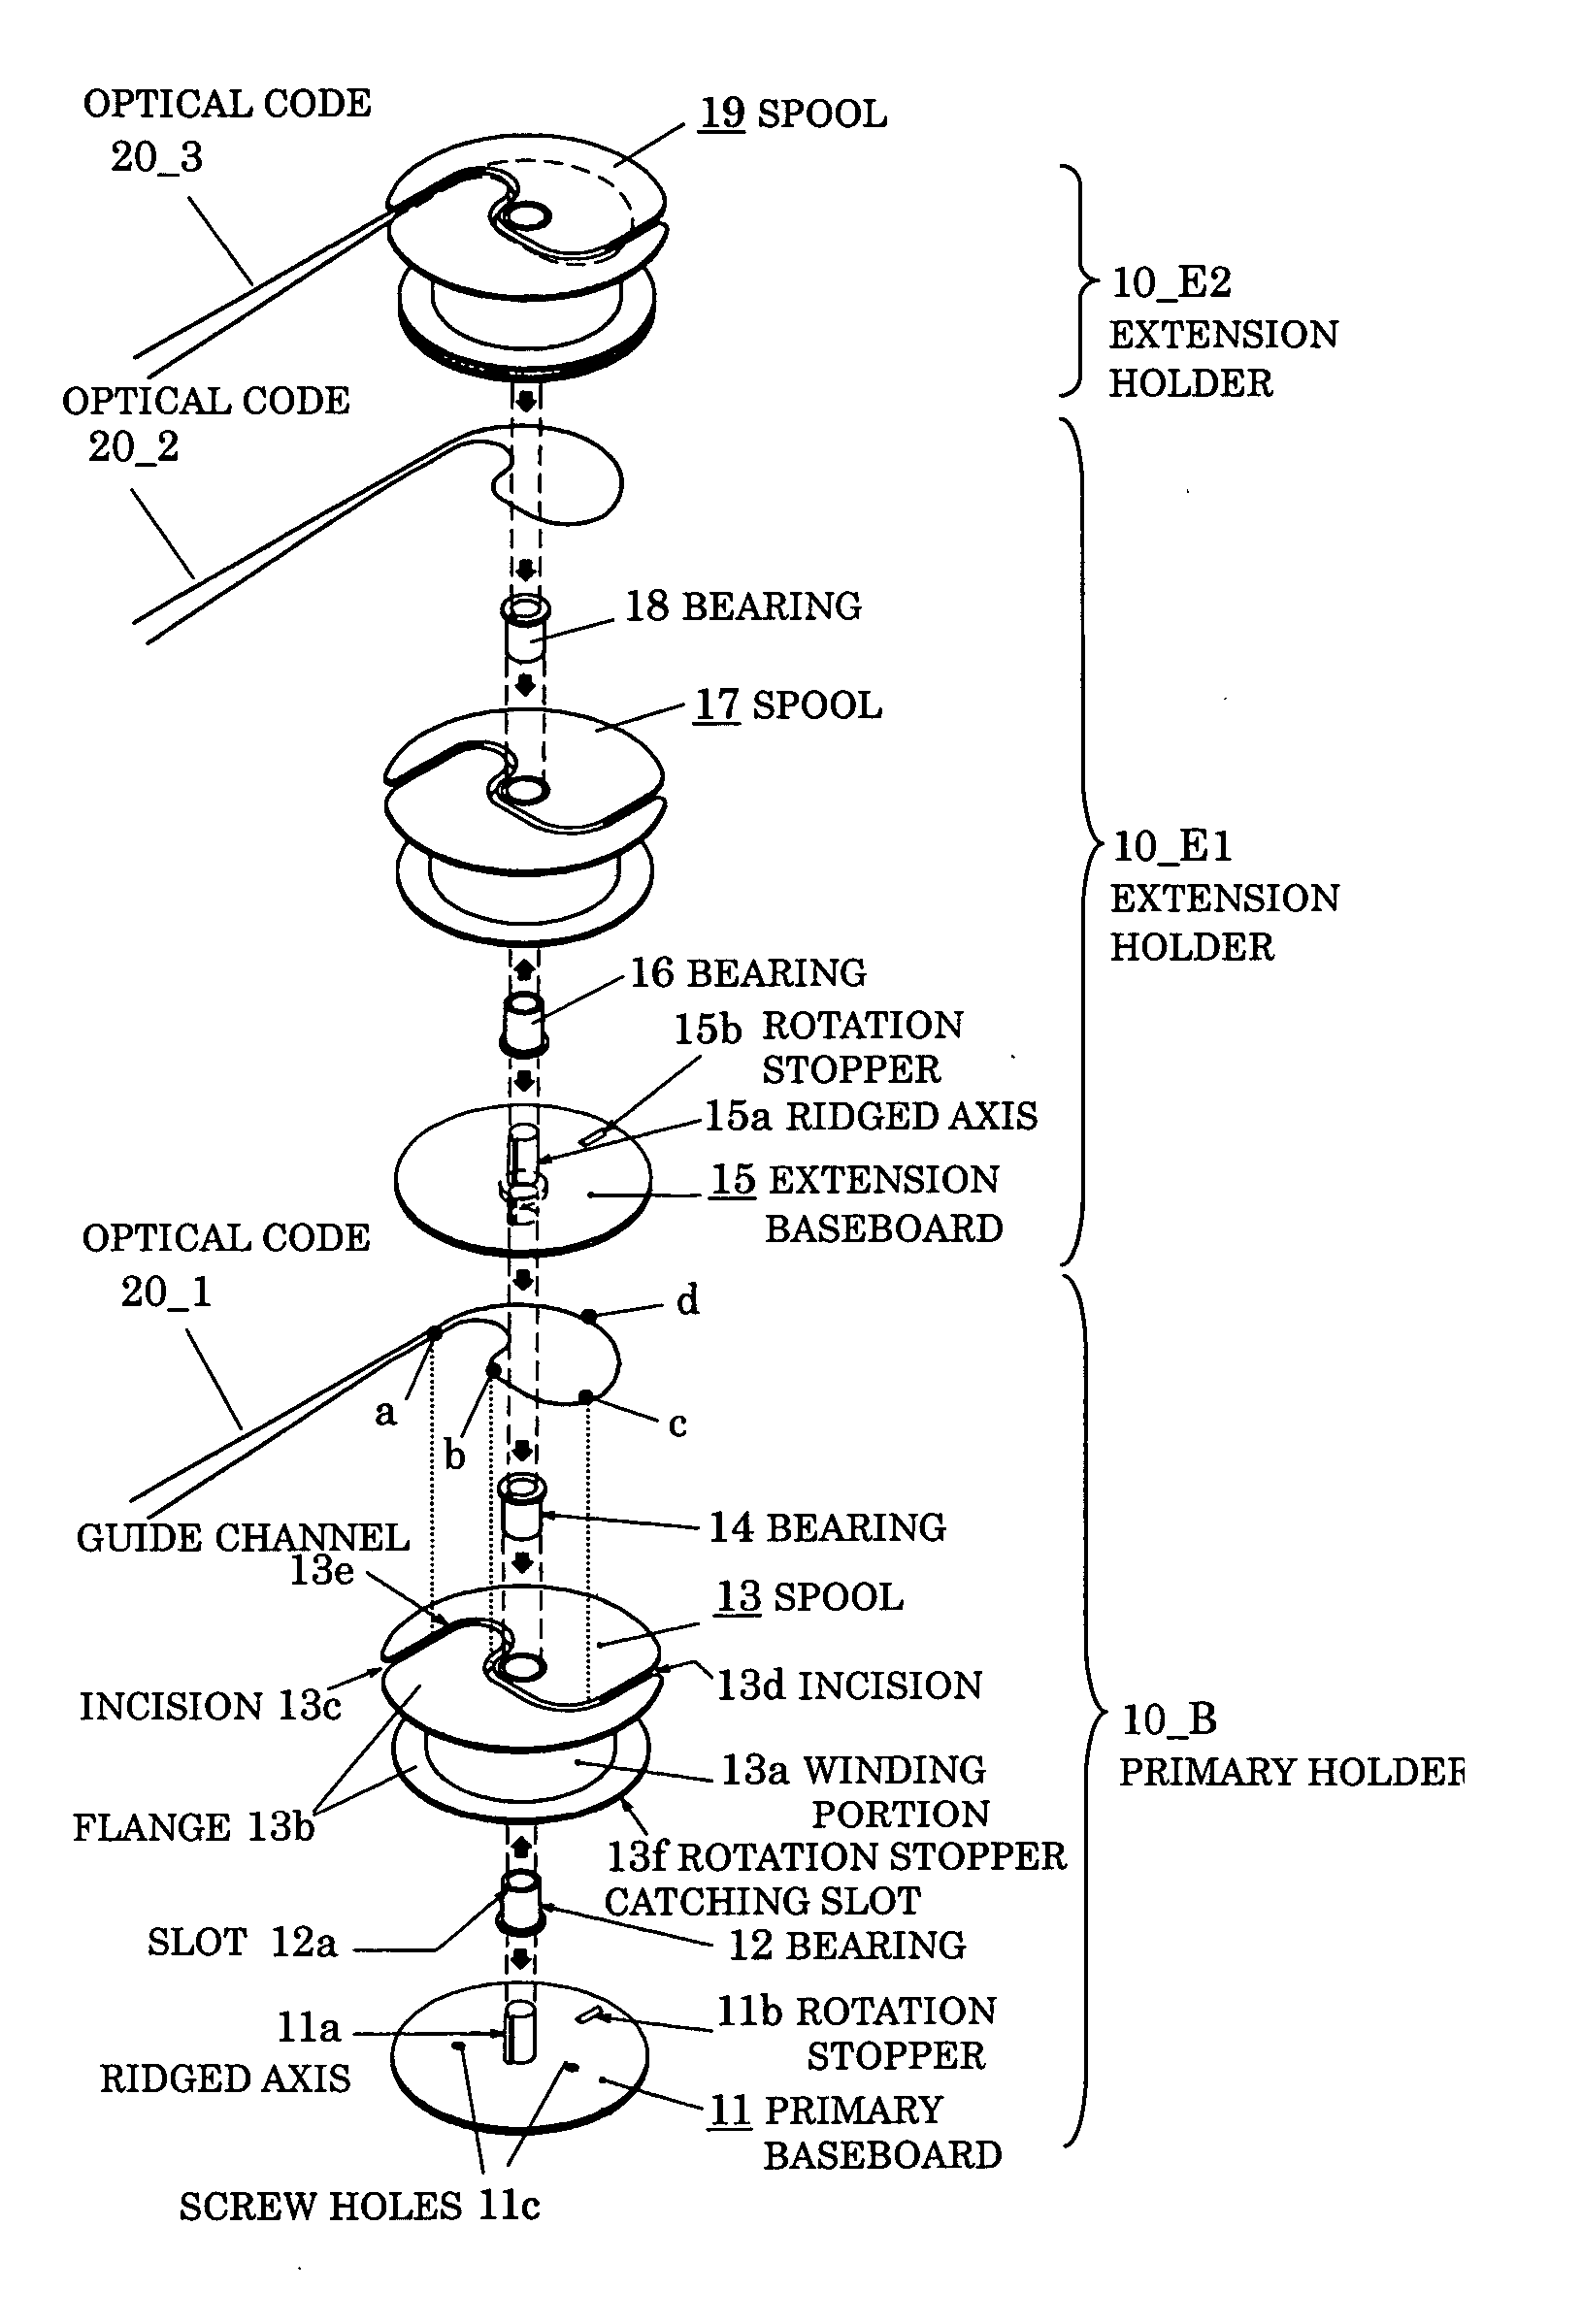 Holder and structure for organizing excess length